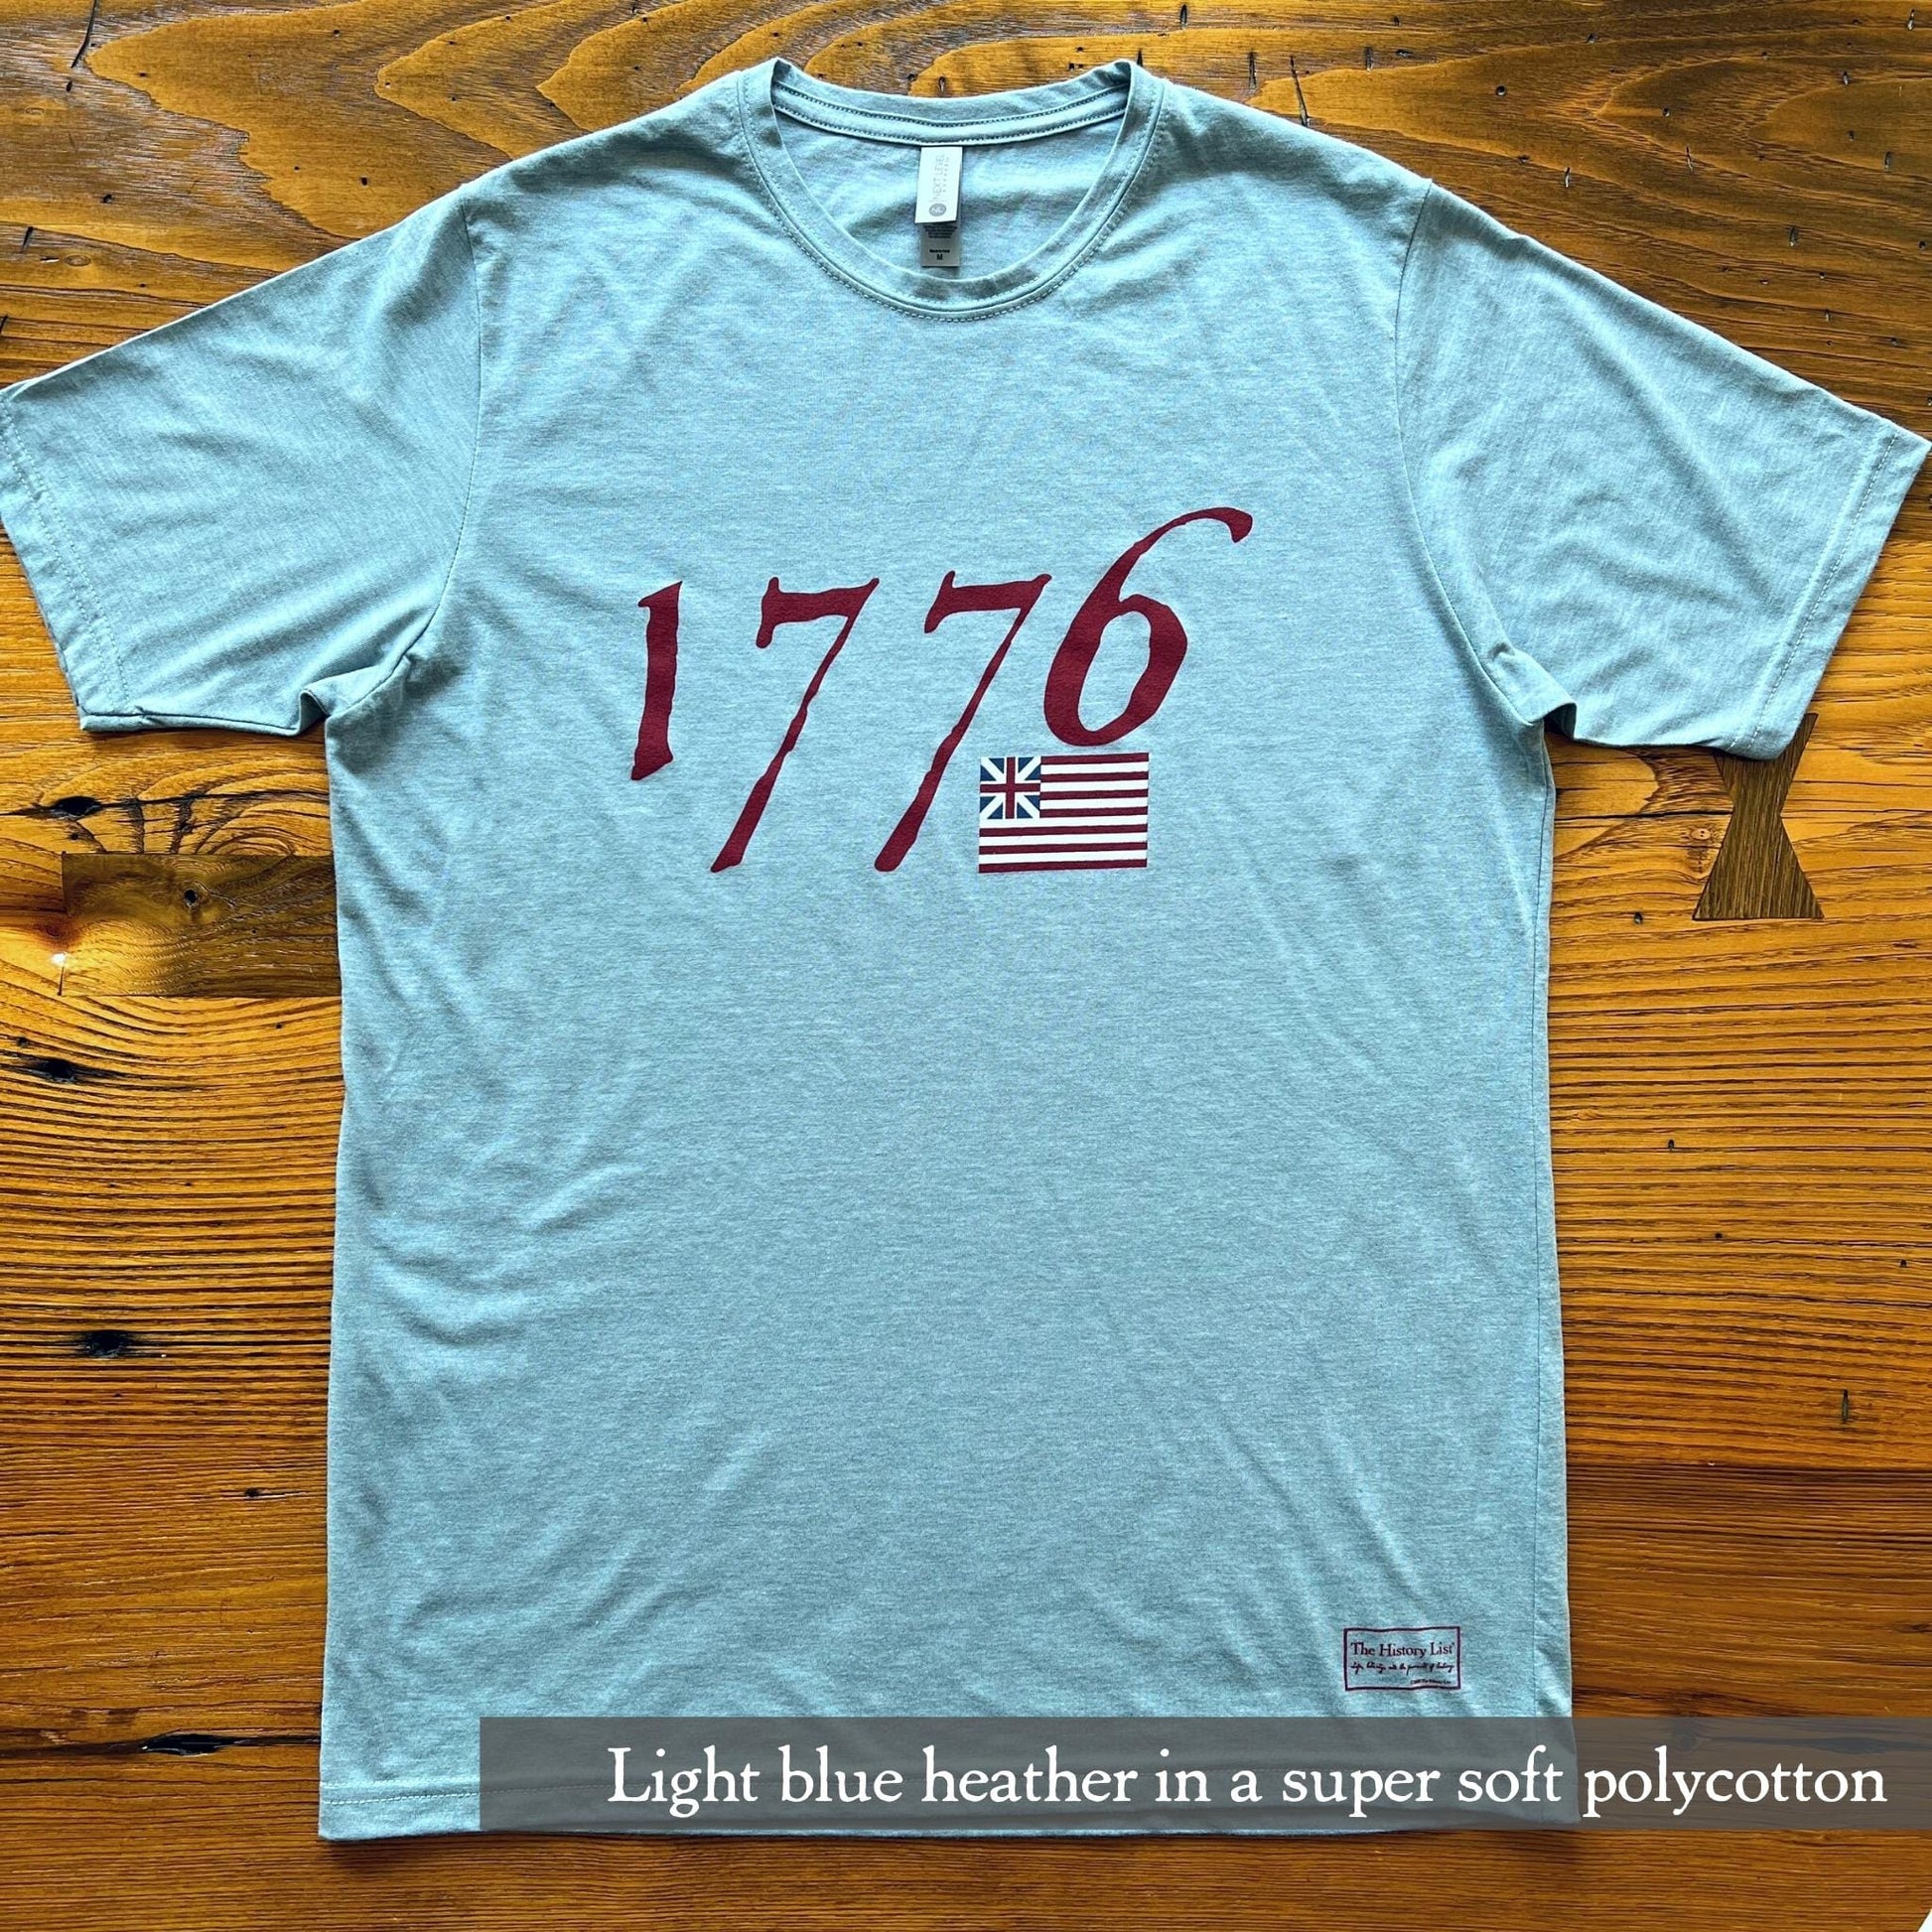 hold truths - 4, 1776” T-shirt – The History List